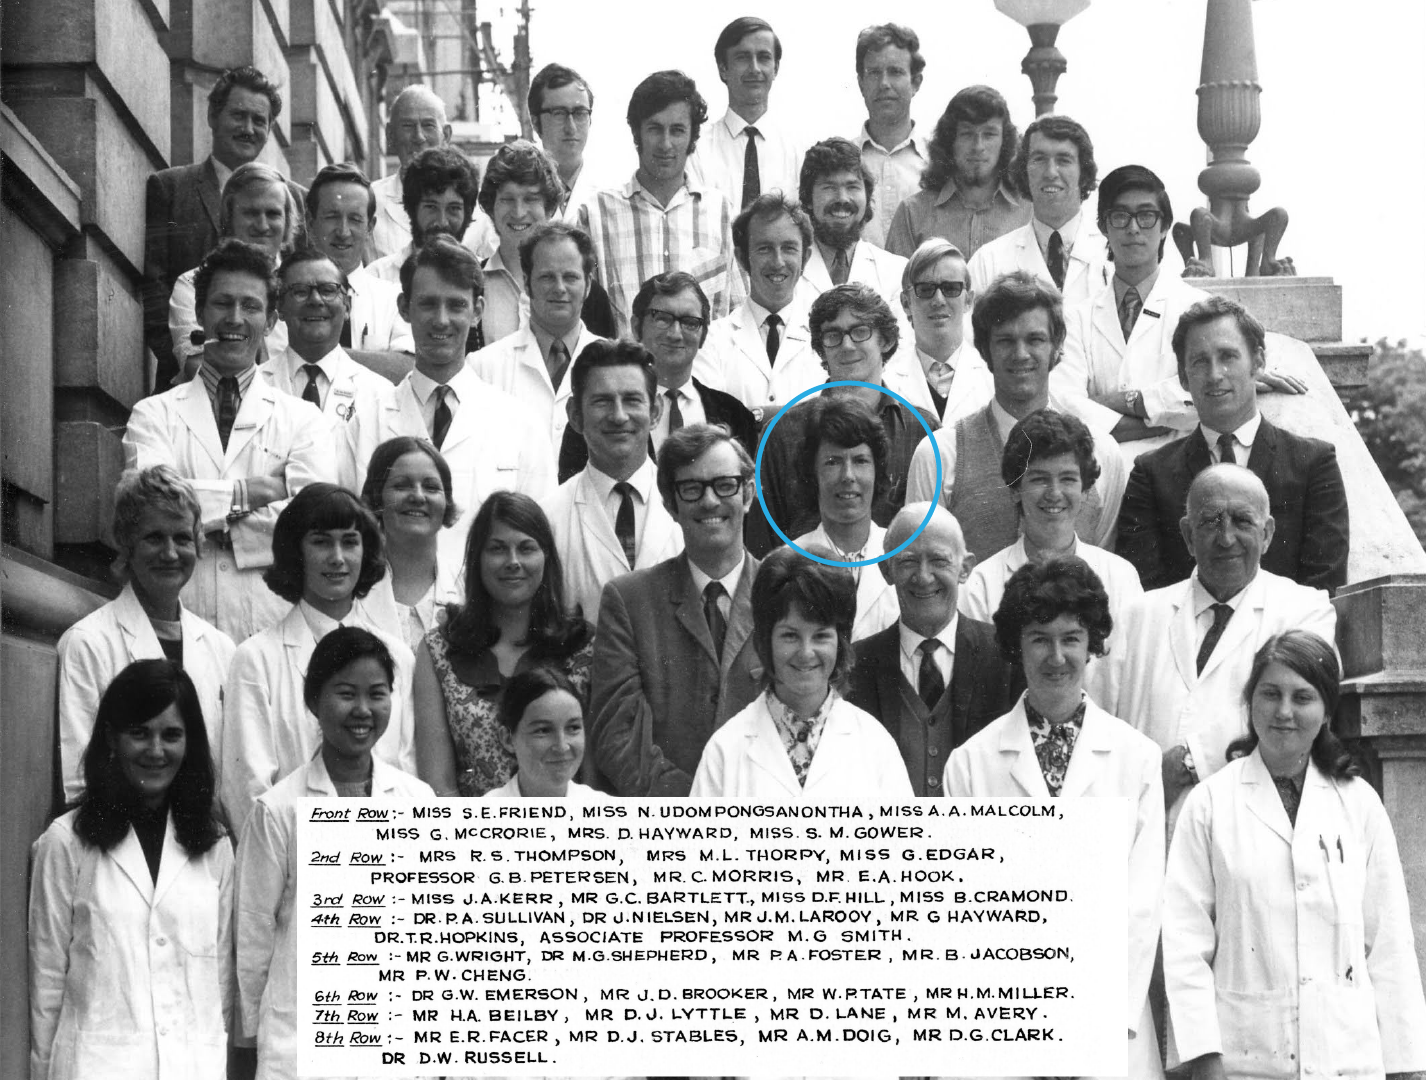 Black and white photo of members of the Otago Department of Biochemistry from 1971 standing on steps and mostly wearing white lab coats.